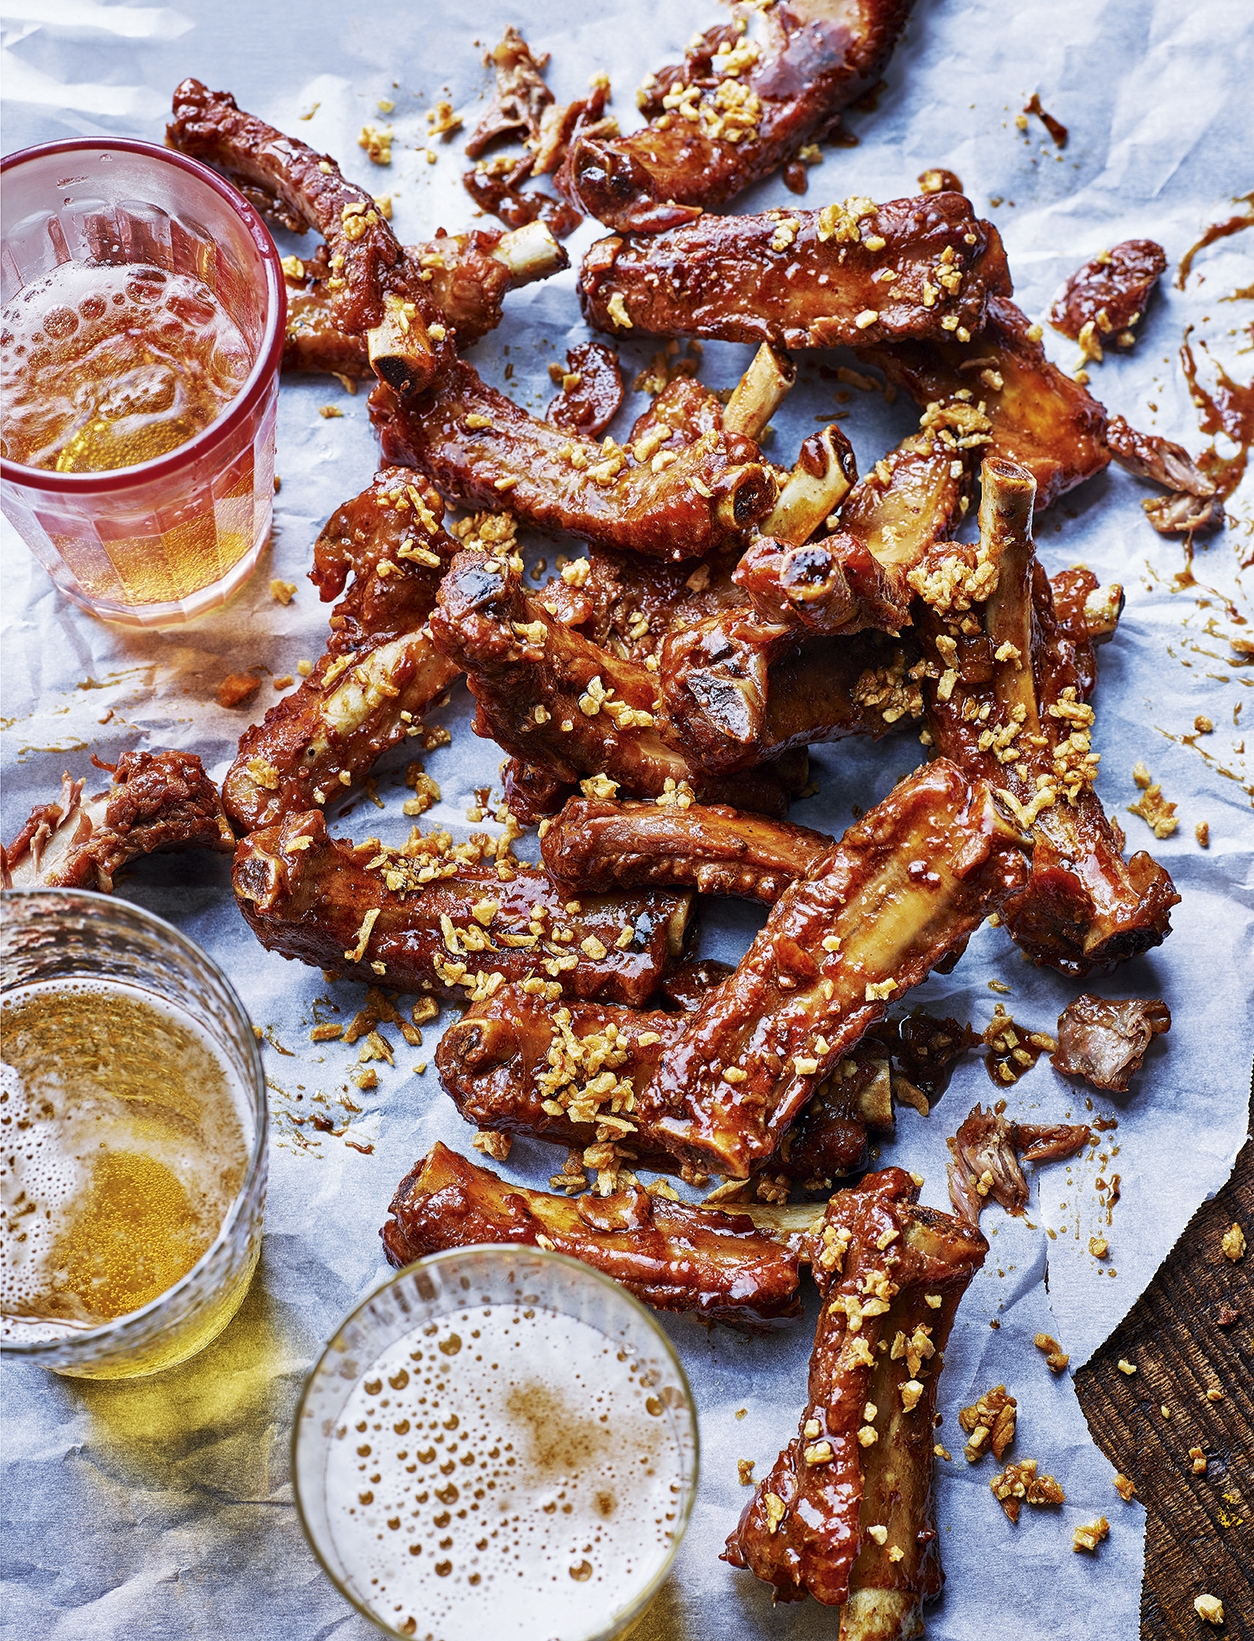 4 Garlicky and Spicy Spare Ribs